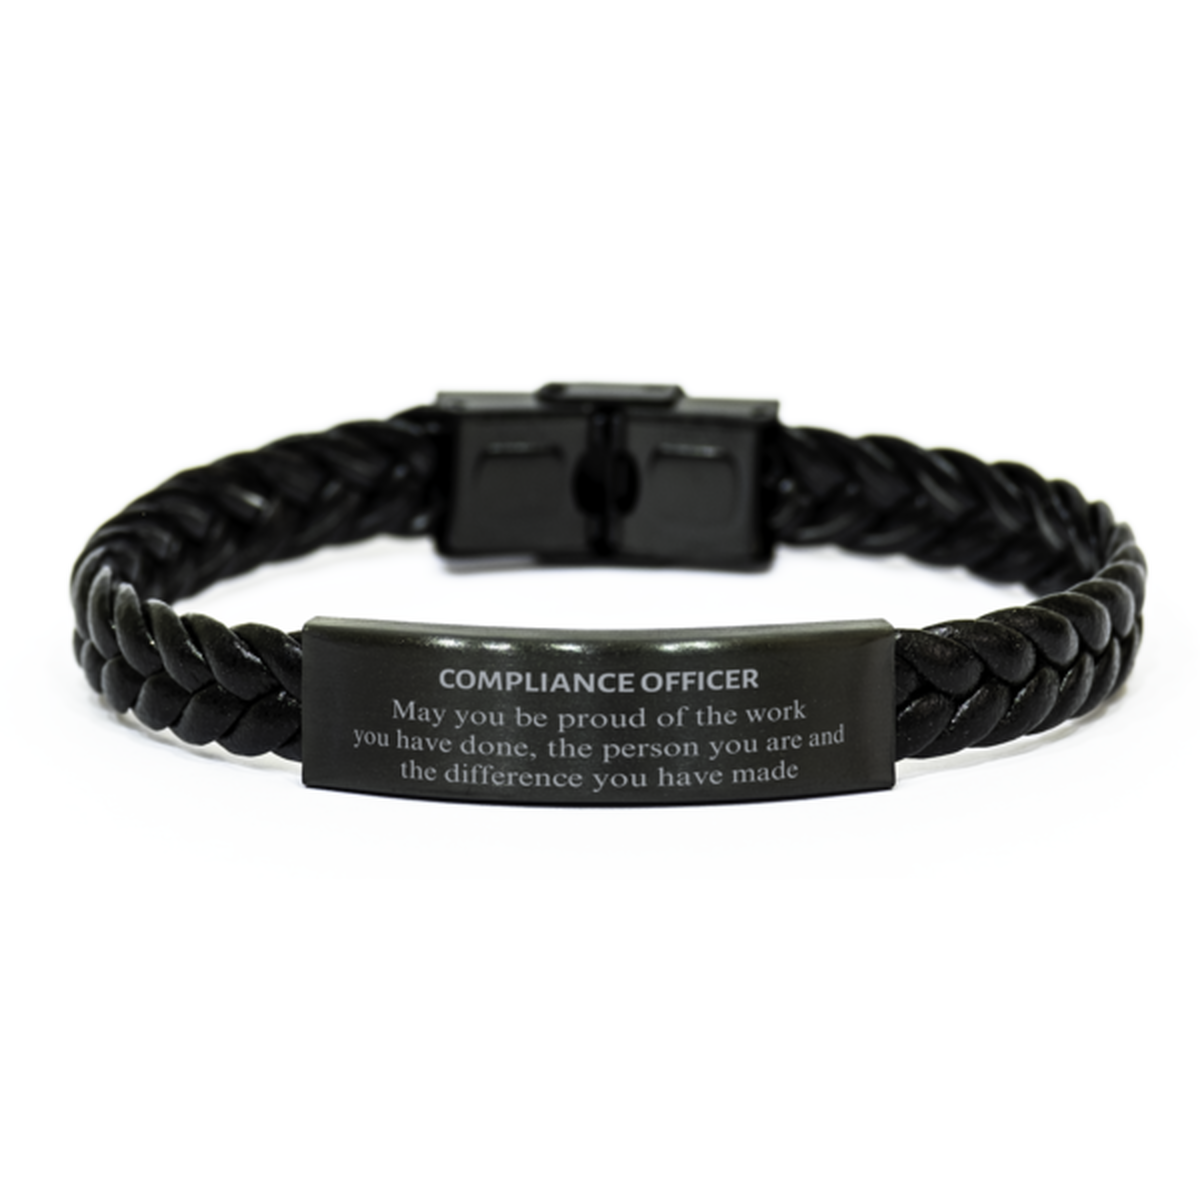 Compliance Officer May you be proud of the work you have done, Retirement Compliance Officer Braided Leather Bracelet for Colleague Appreciation Gifts Amazing for Compliance Officer